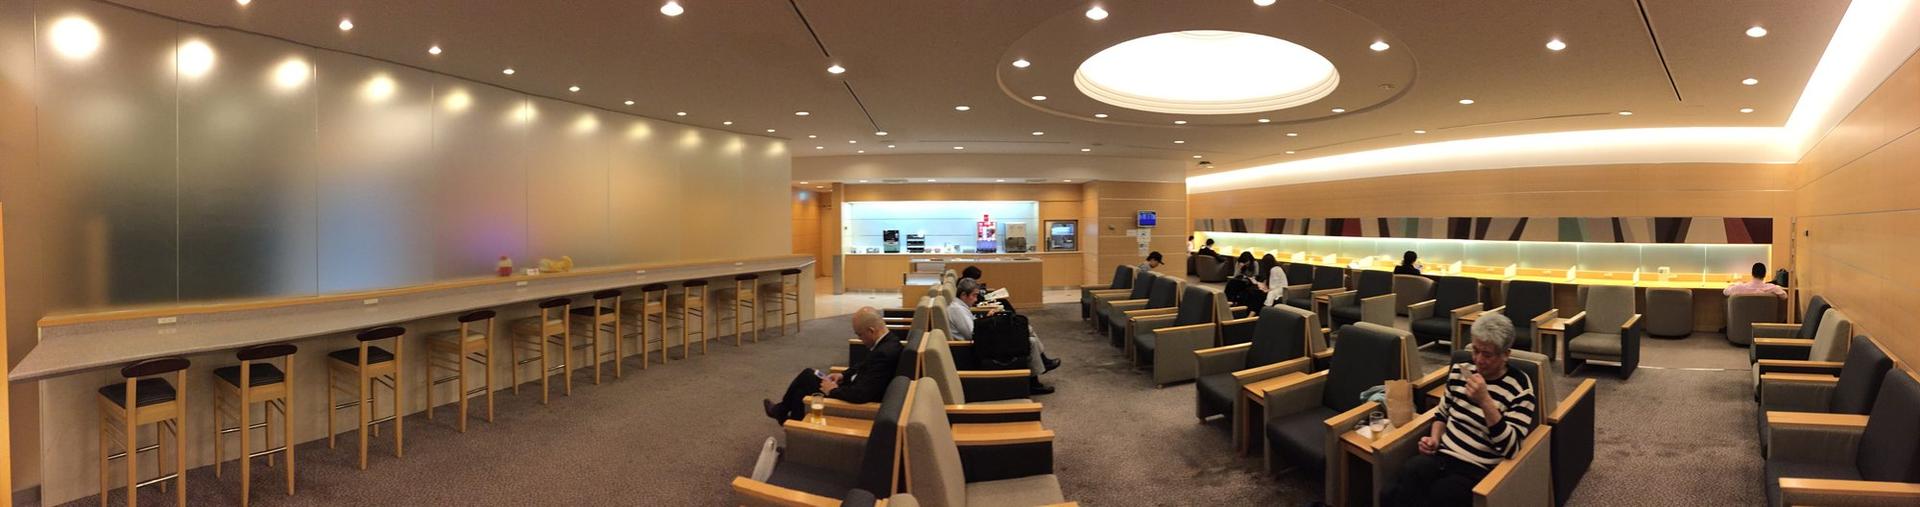 Centrair Airline Lounge image 2 of 5